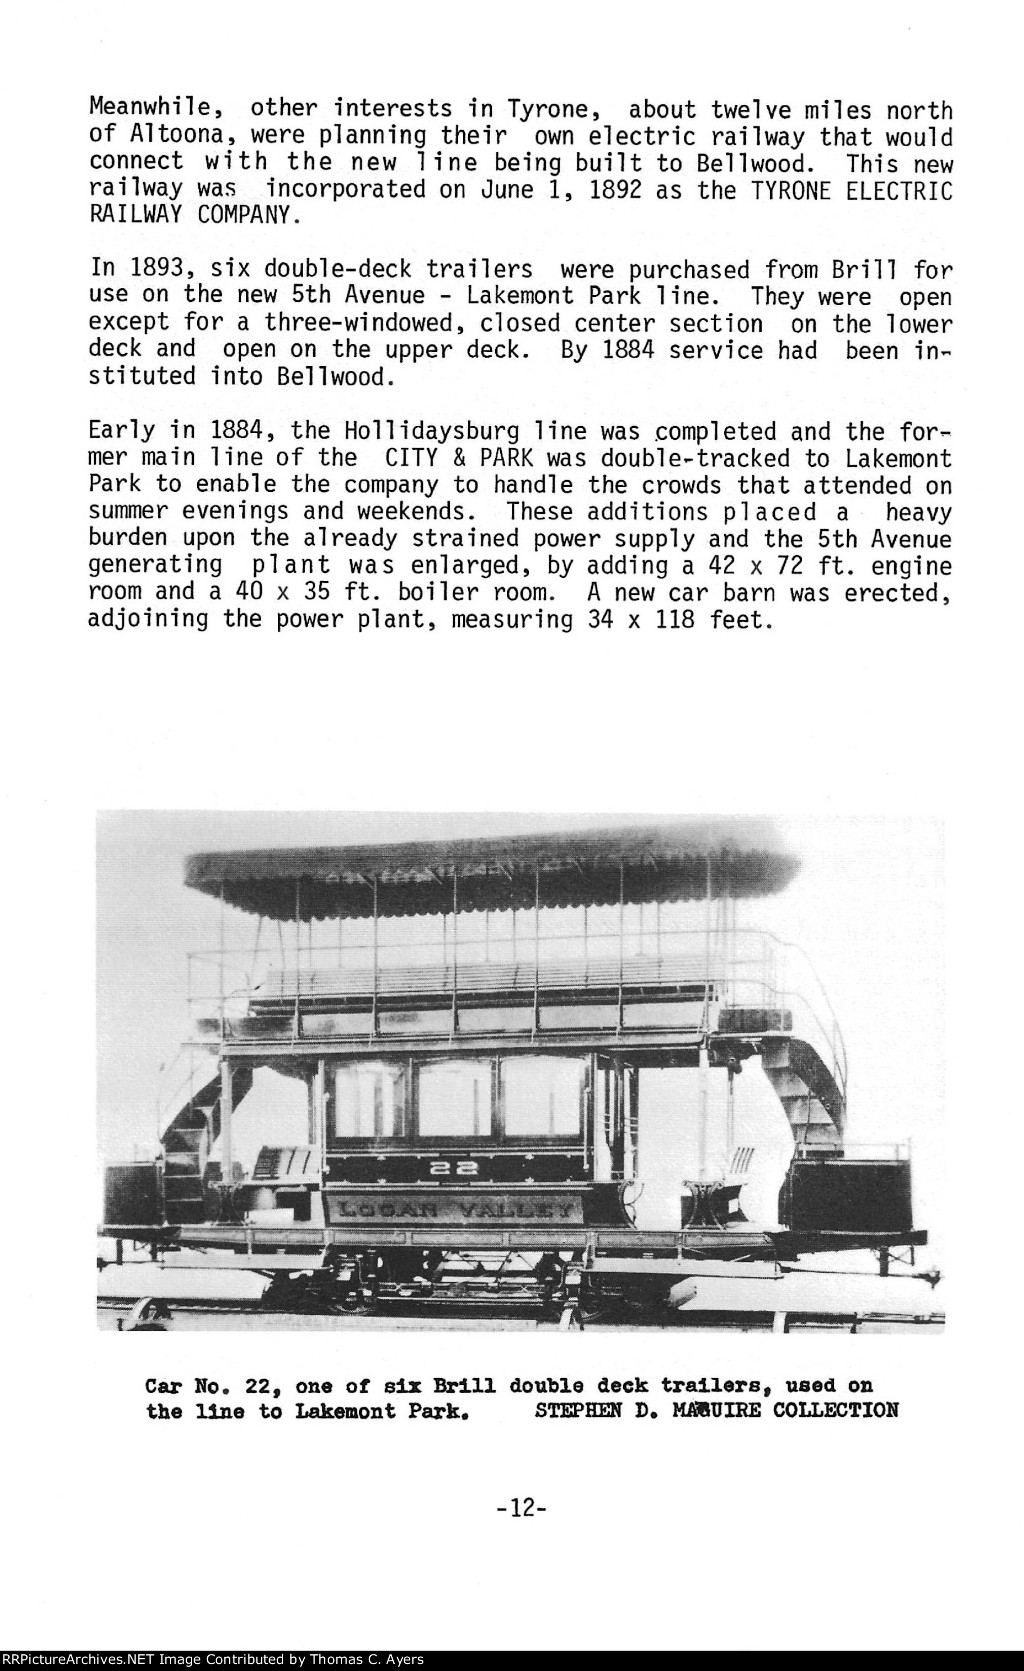 "Altoonas Trolley's," Page 12, 1980